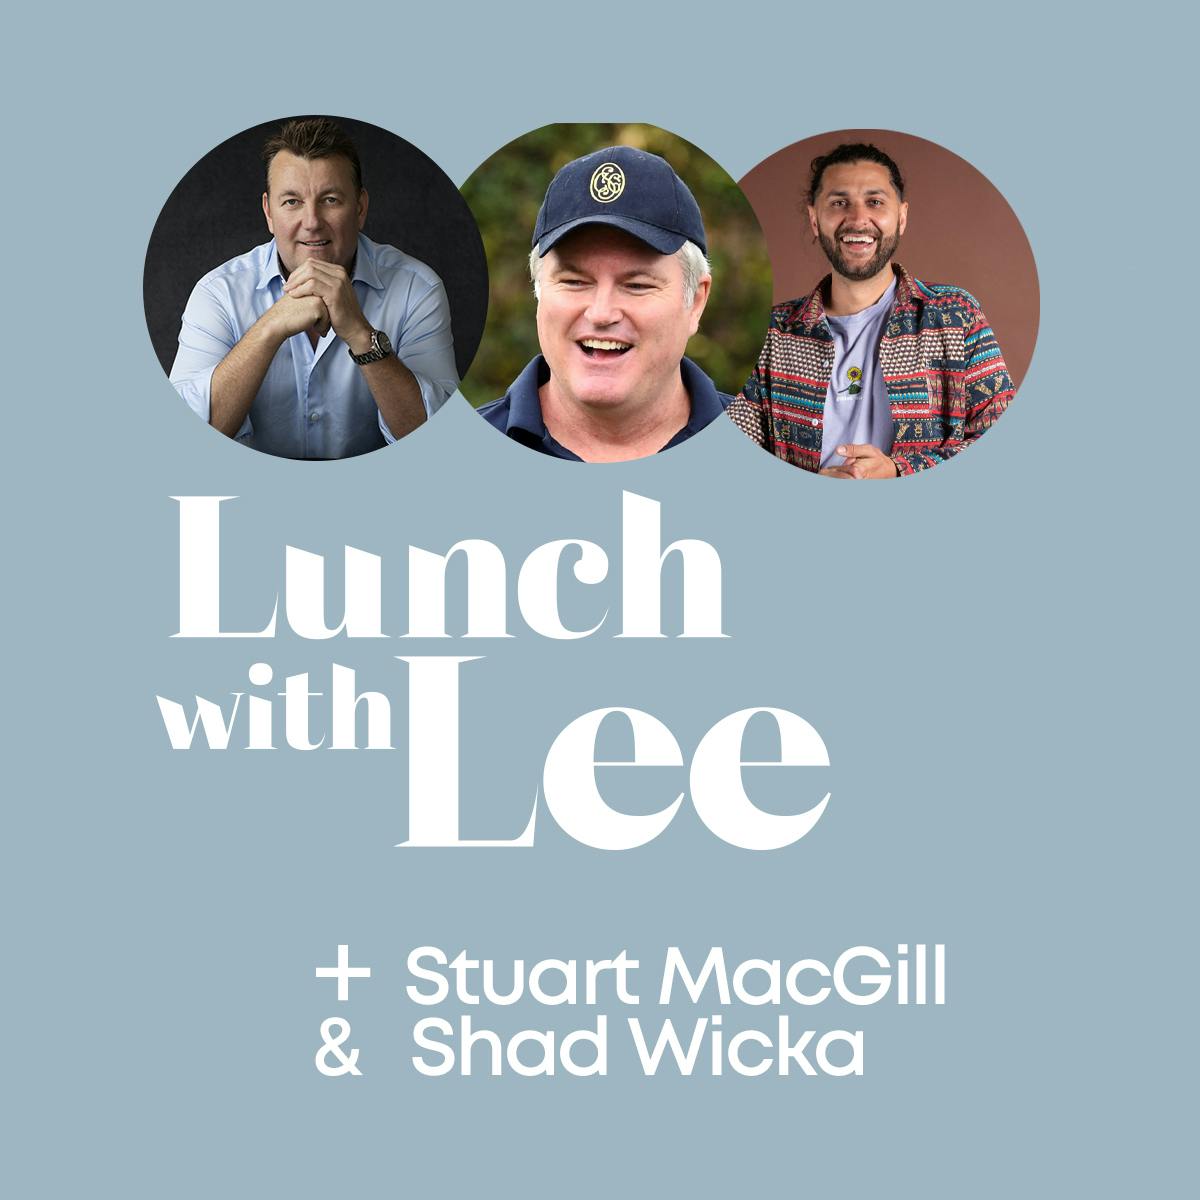 Lunch with Stuart MacGill and Shad Wicka